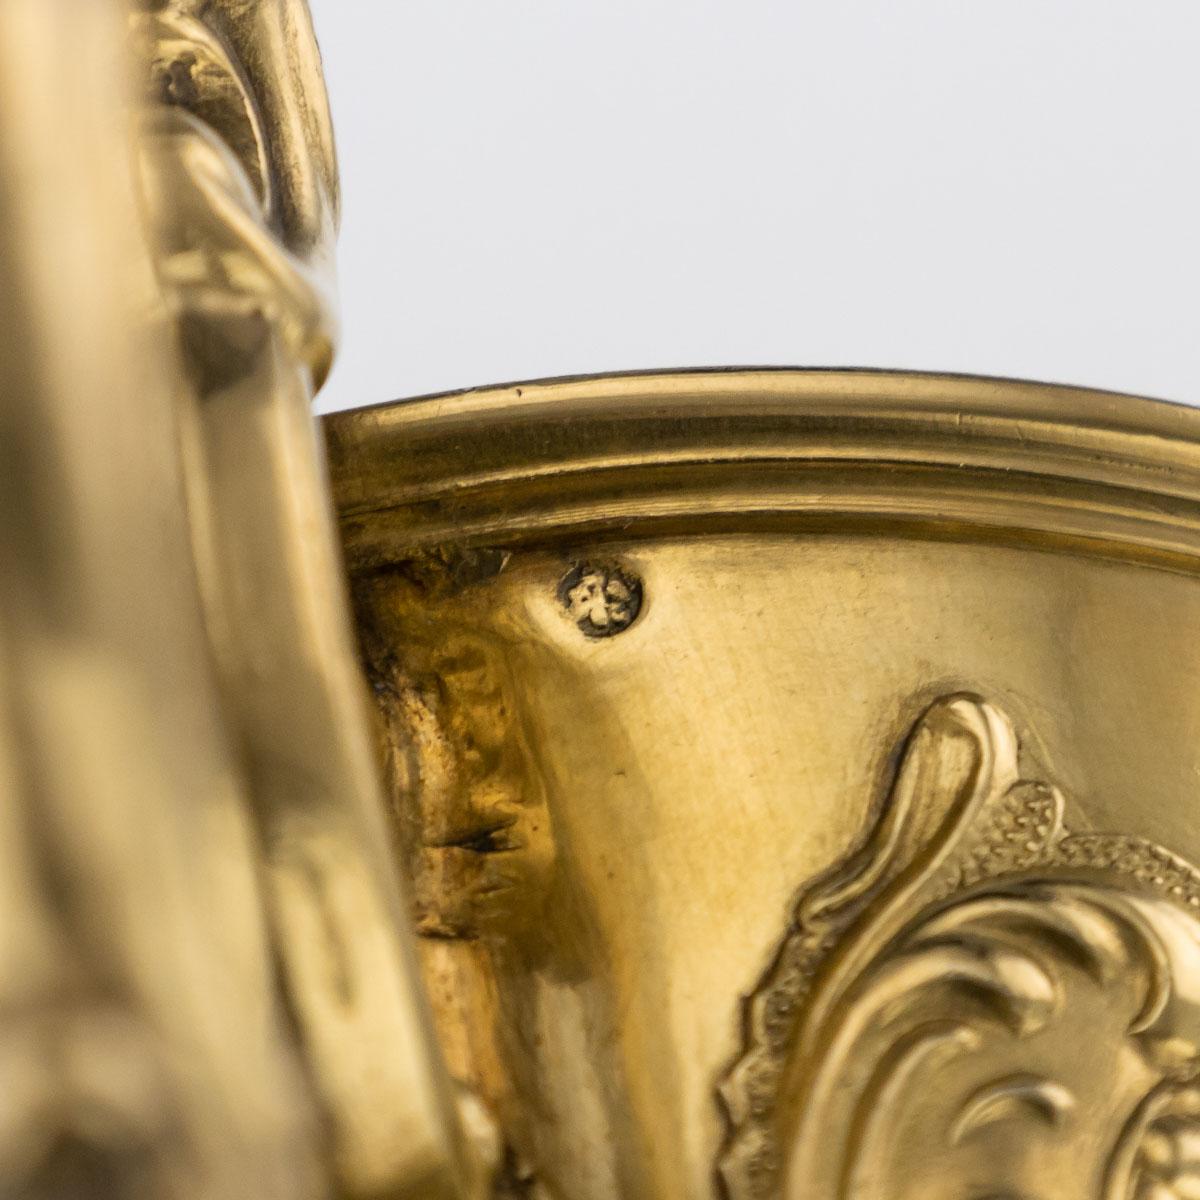 19th Century Russian Solid Silver-Gilt Cup and Cover, St-Petersburg, circa 1842 11